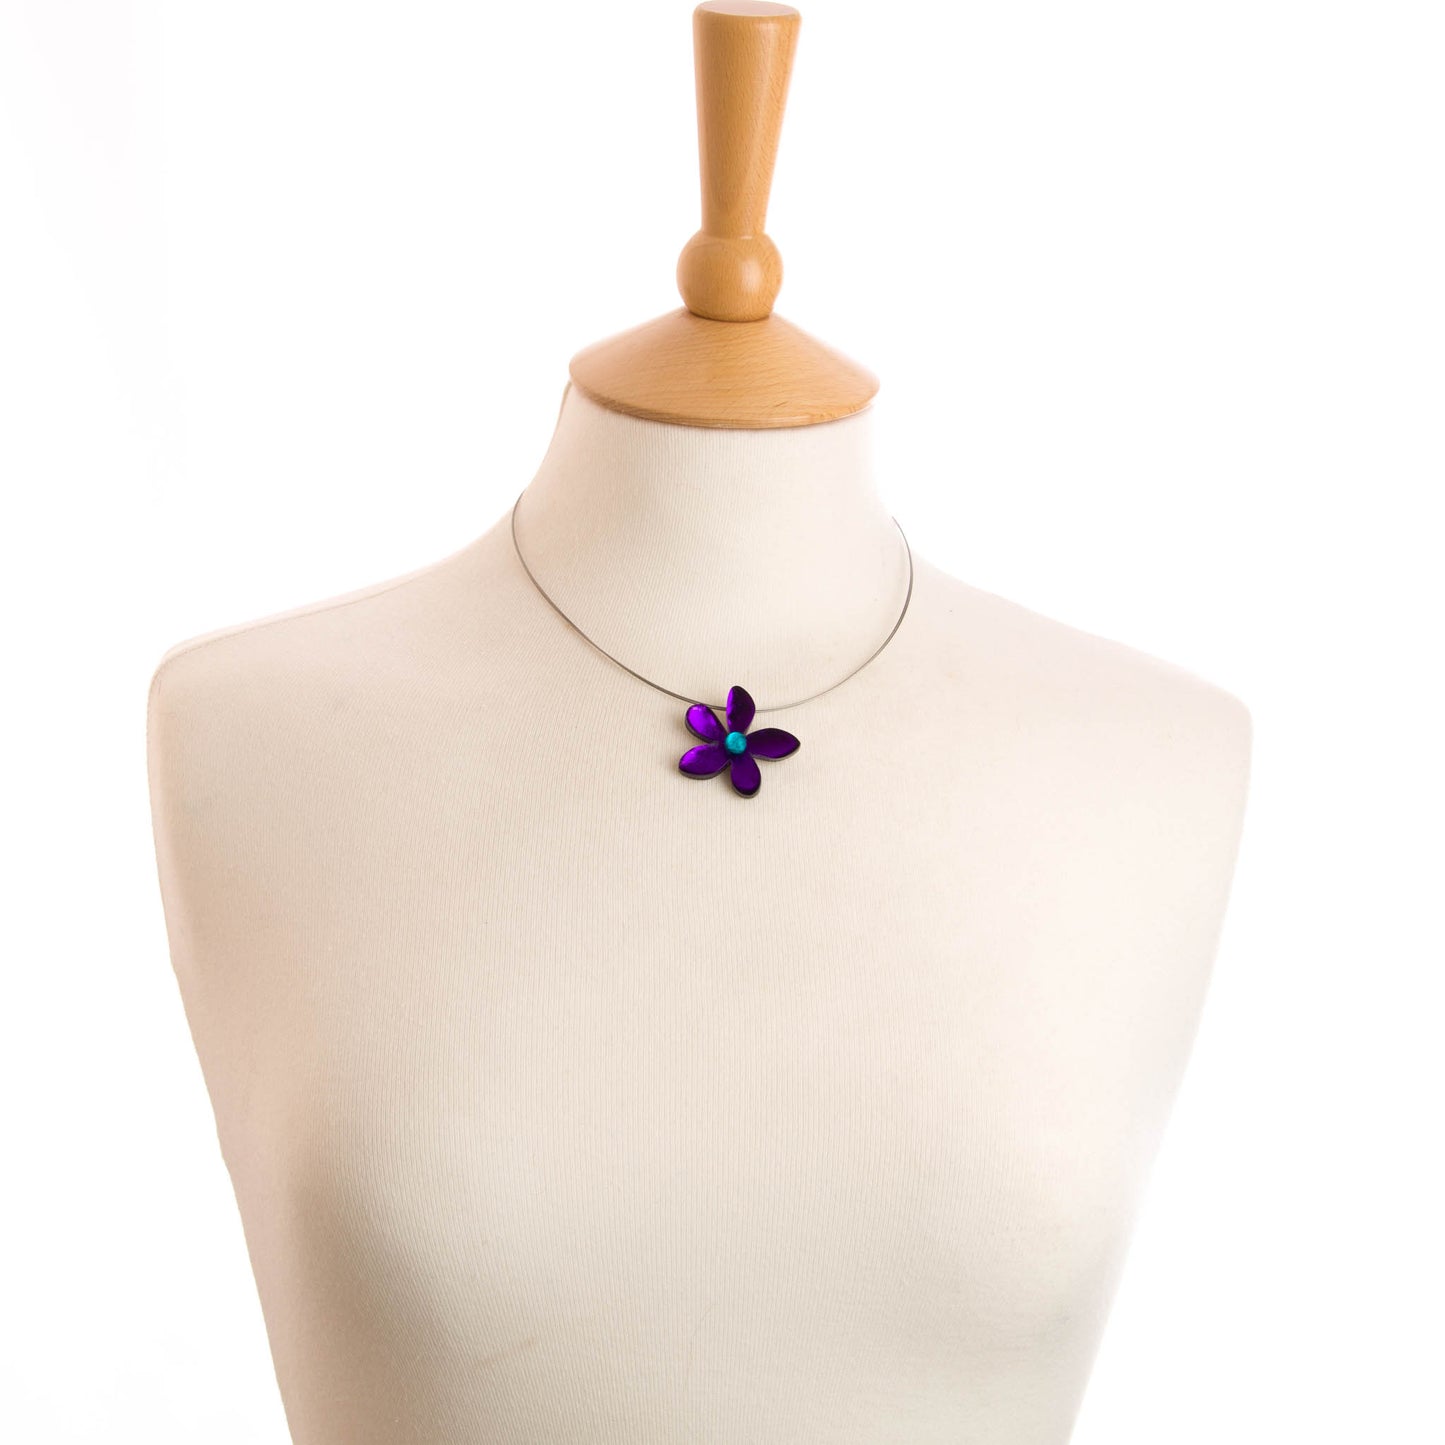 Watch this Space Small Flower Pendant, Flower Extravaganza Collection, Peacock